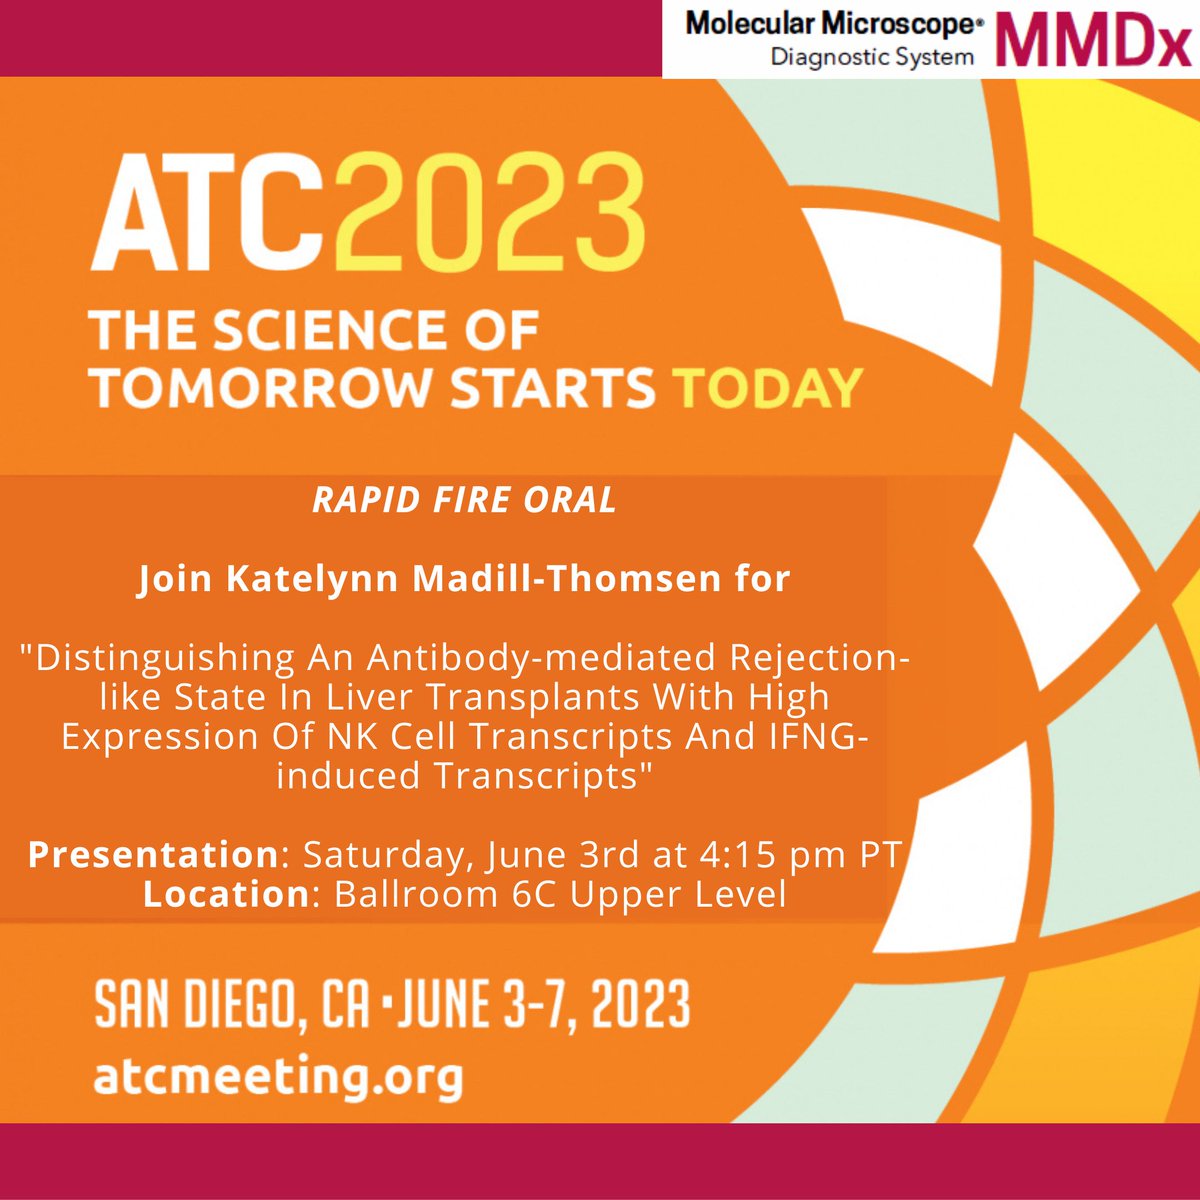 Join us for Dr. Katelynn Madill-Thomsen's Rapid Fire Oral at #ATC2023! Register at atcmeeting.org